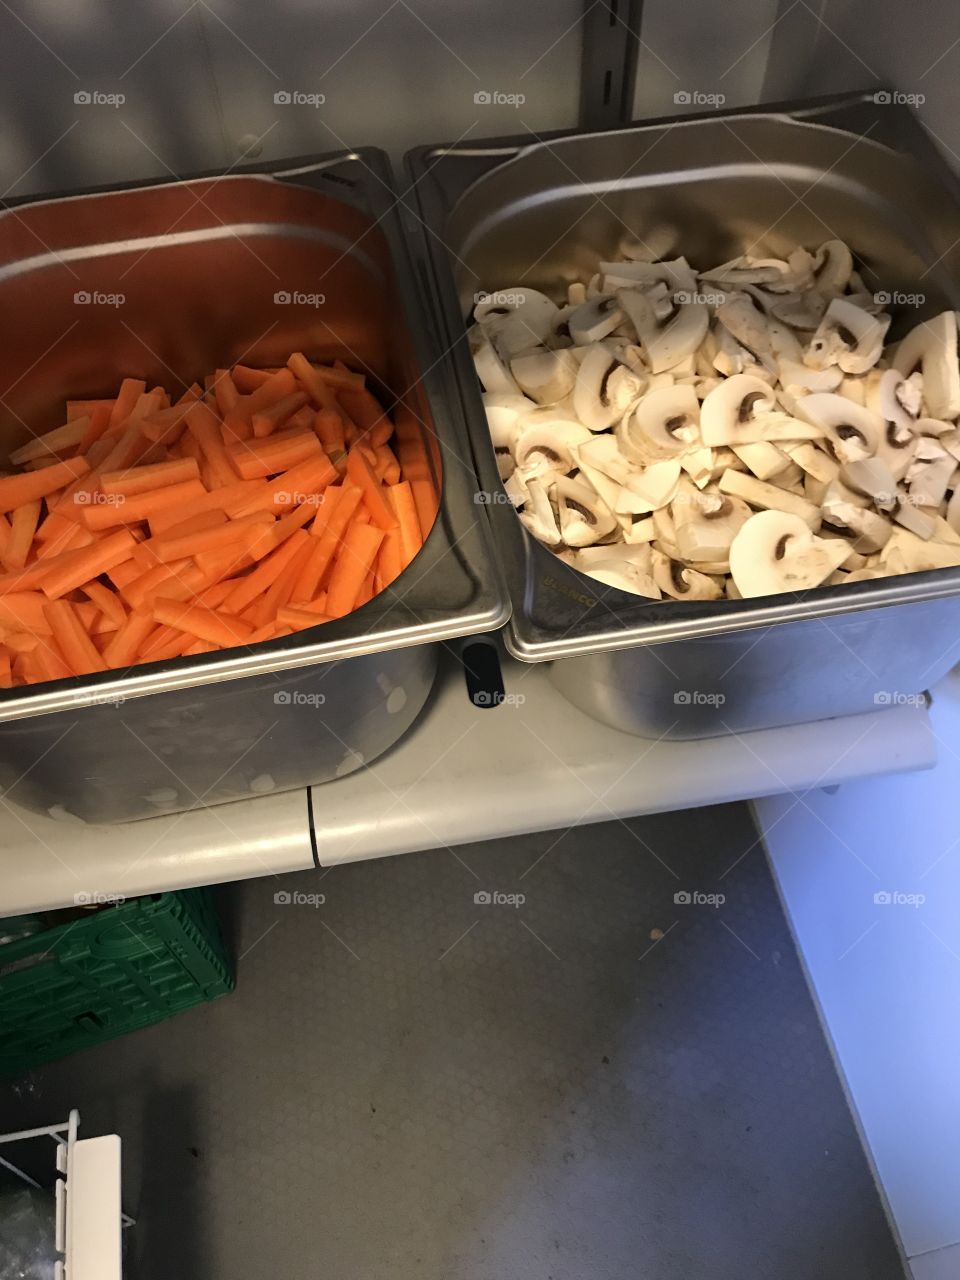 Carrots and mushrooms. This is after preparing food for a little over 50 guests on a restaurant.